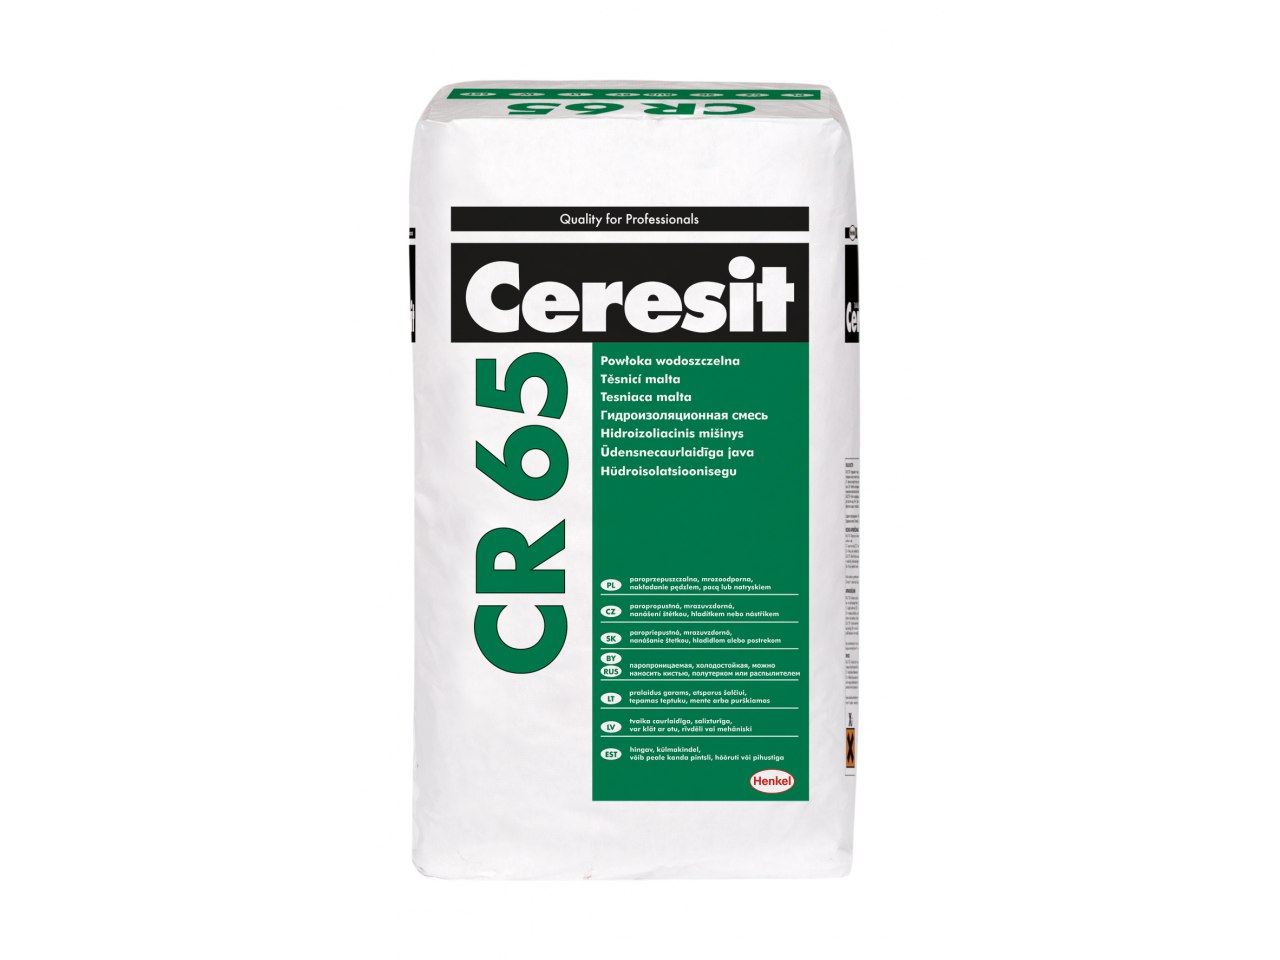 Can Ceresit CR65 waterproofing be used instead of Ceresit CE33 grout?